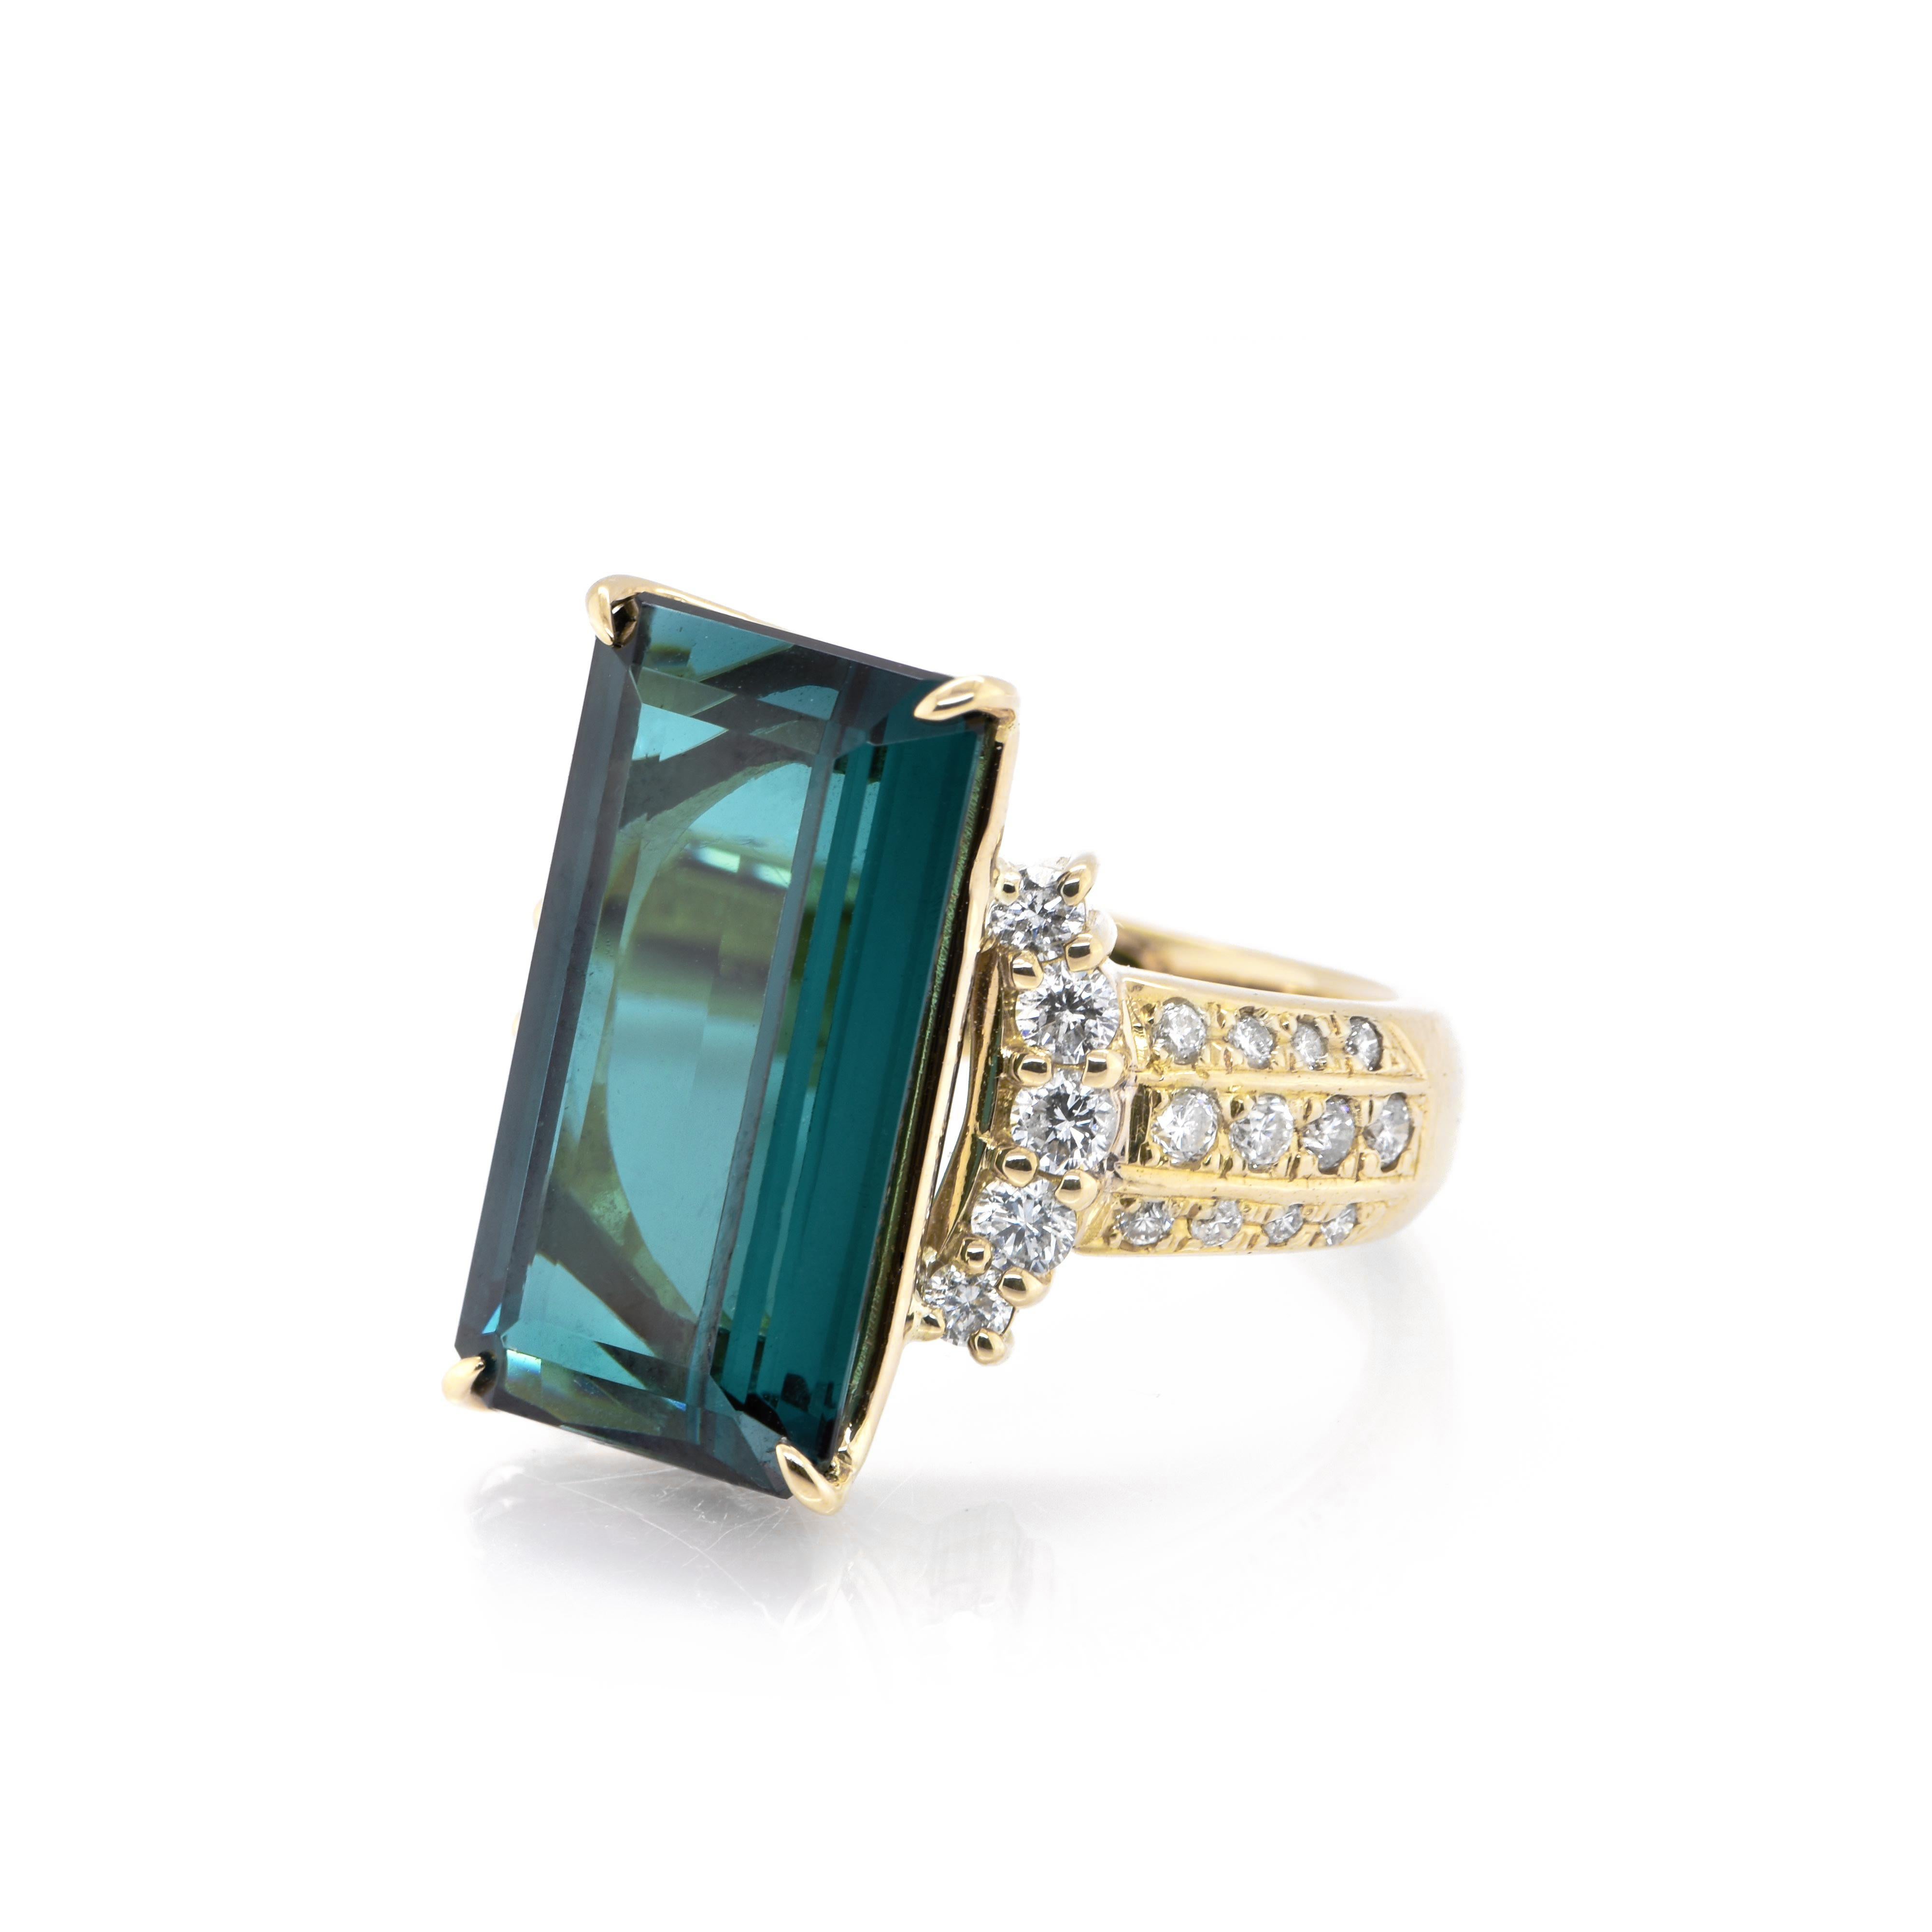 A stunning Cocktail Ring featuring a 10.56 Carat, Natural Indicolite Tourmaline and 1.00 Carats of Diamond Accents set in 18 Karat Yellow Gold. Tourmalines were first discovered by Spanish conquistadors in Brazil in 1500s. The name Tourmaline comes